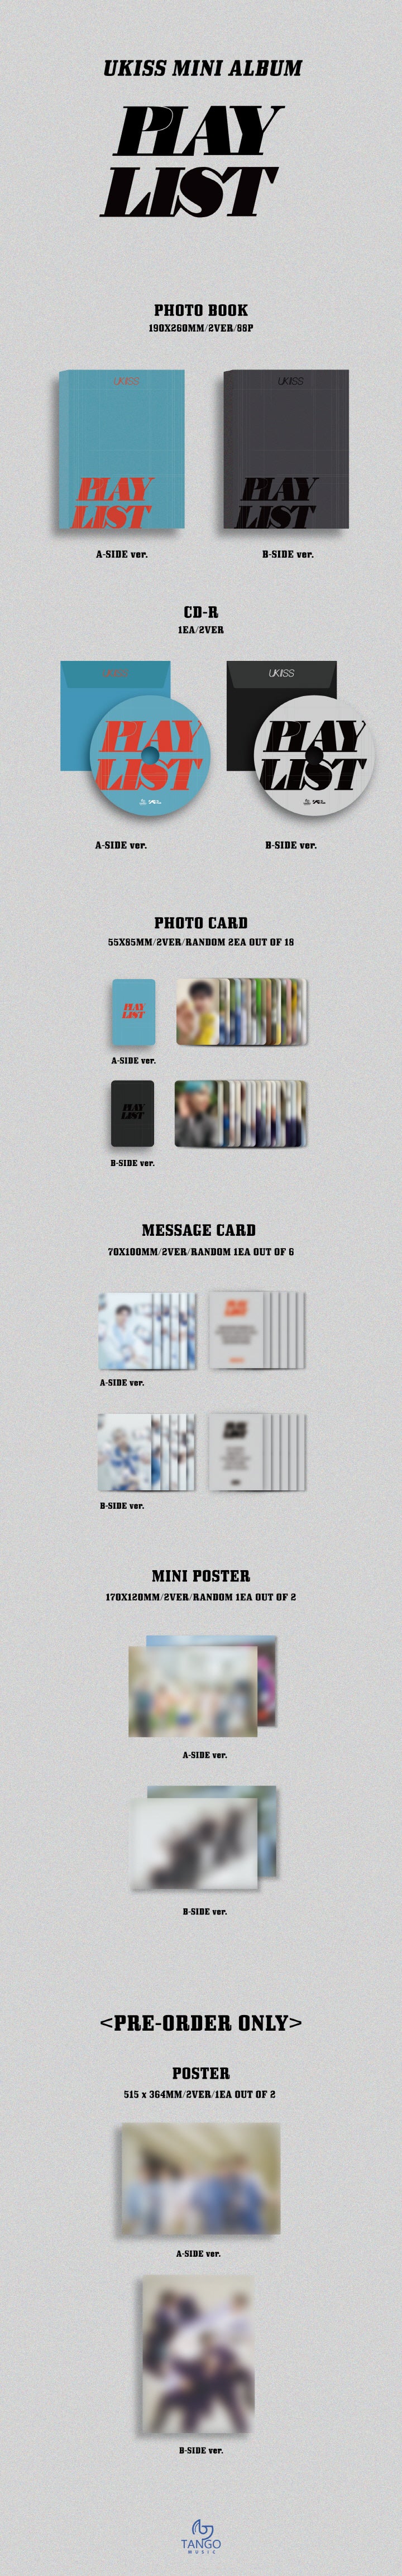 1 CD
1 Photo Book (88 pages)
2 Photo Cards (random out of 18 pages)
1 Message Card (random out of 6 types)
1 Mini Poster (...